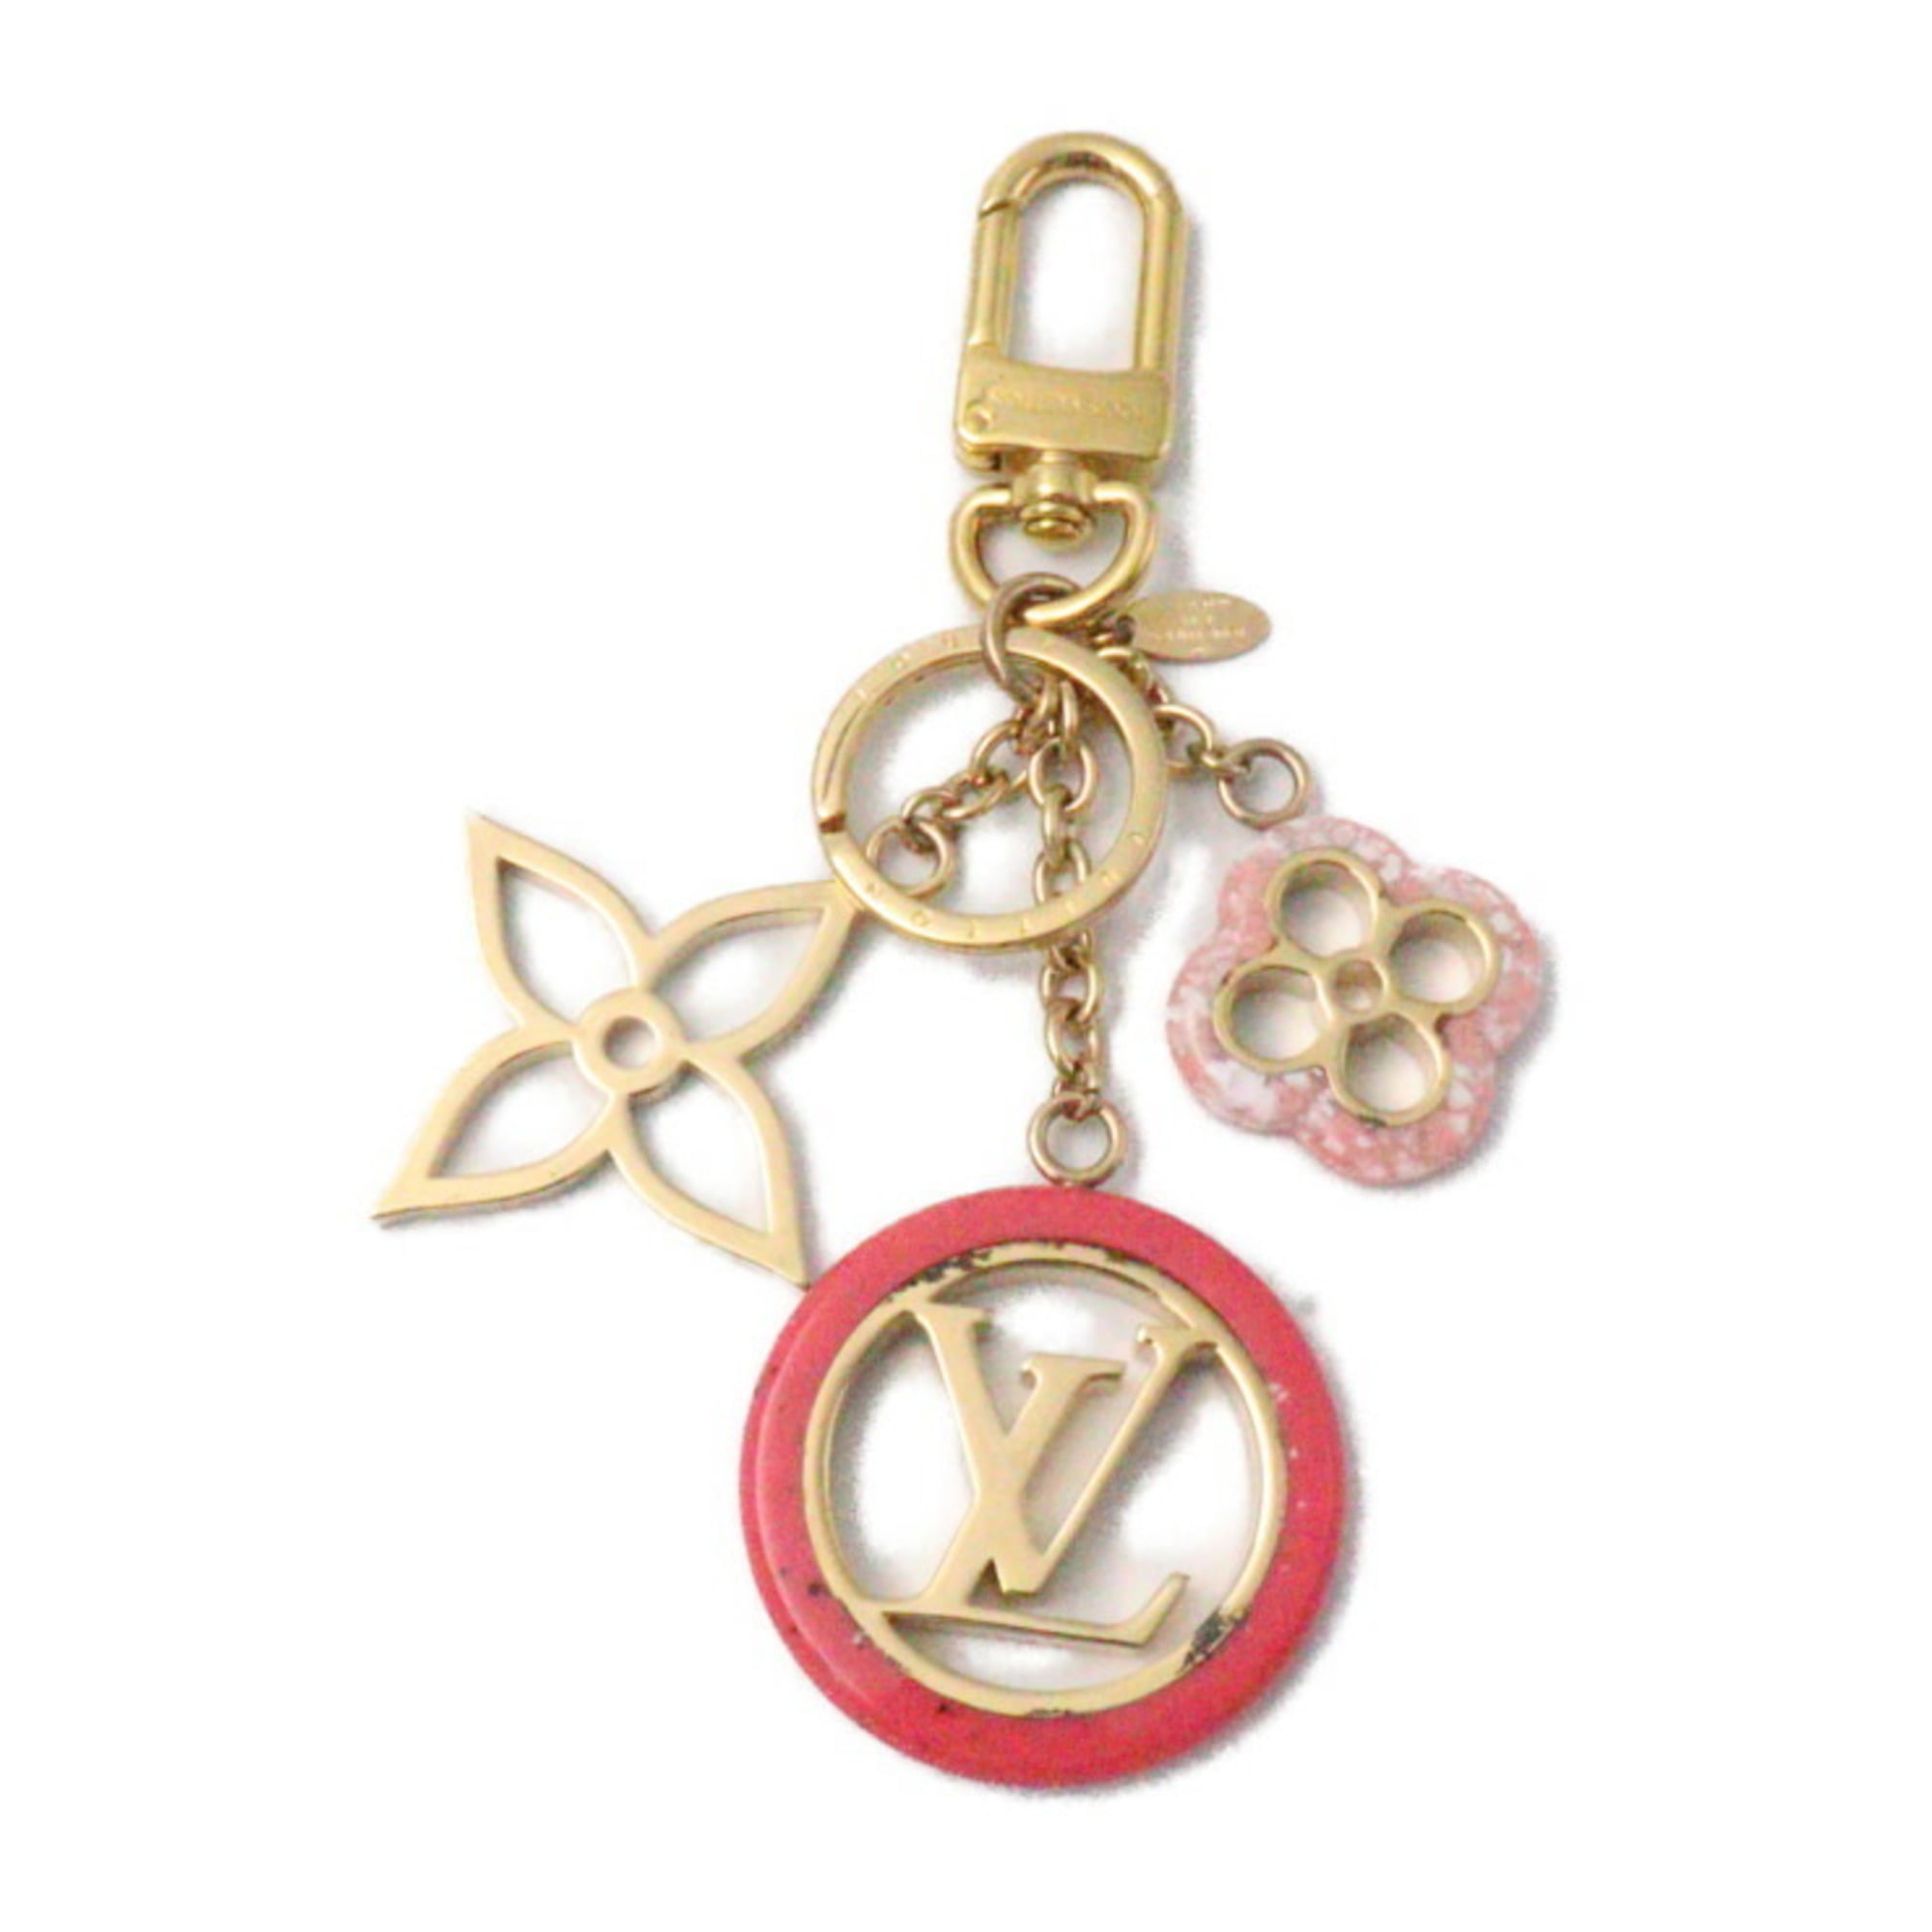 Buy LOUIS VUITTON key holder M62226 13909 multicolor [USED] from